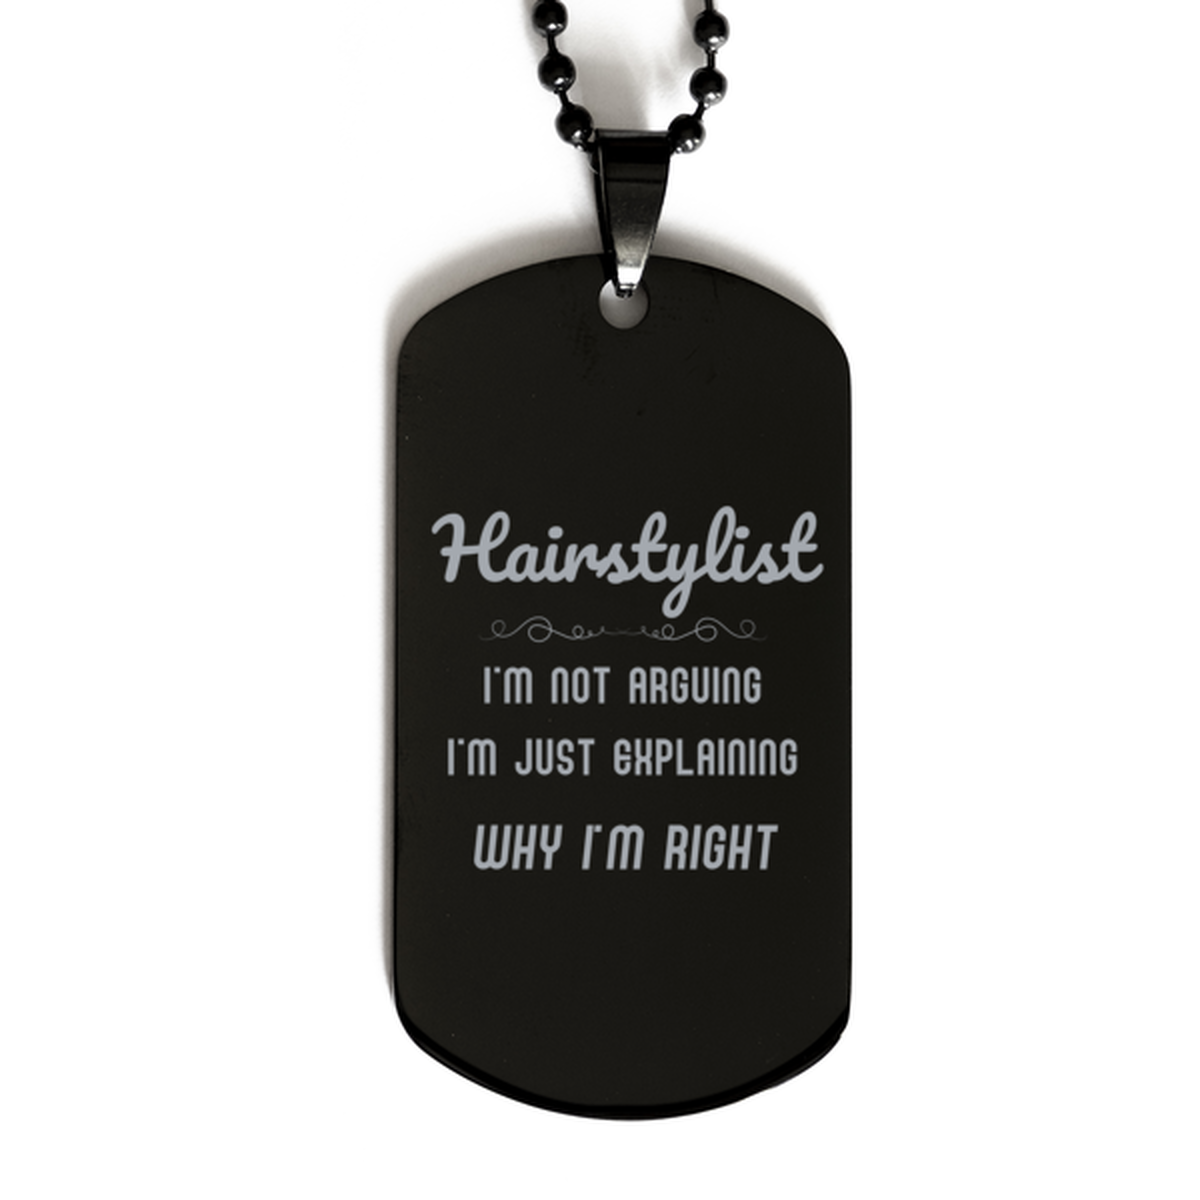 Hairstylist I'm not Arguing. I'm Just Explaining Why I'm RIGHT Black Dog Tag, Funny Saying Quote Hairstylist Gifts For Hairstylist Graduation Birthday Christmas Gifts for Men Women Coworker